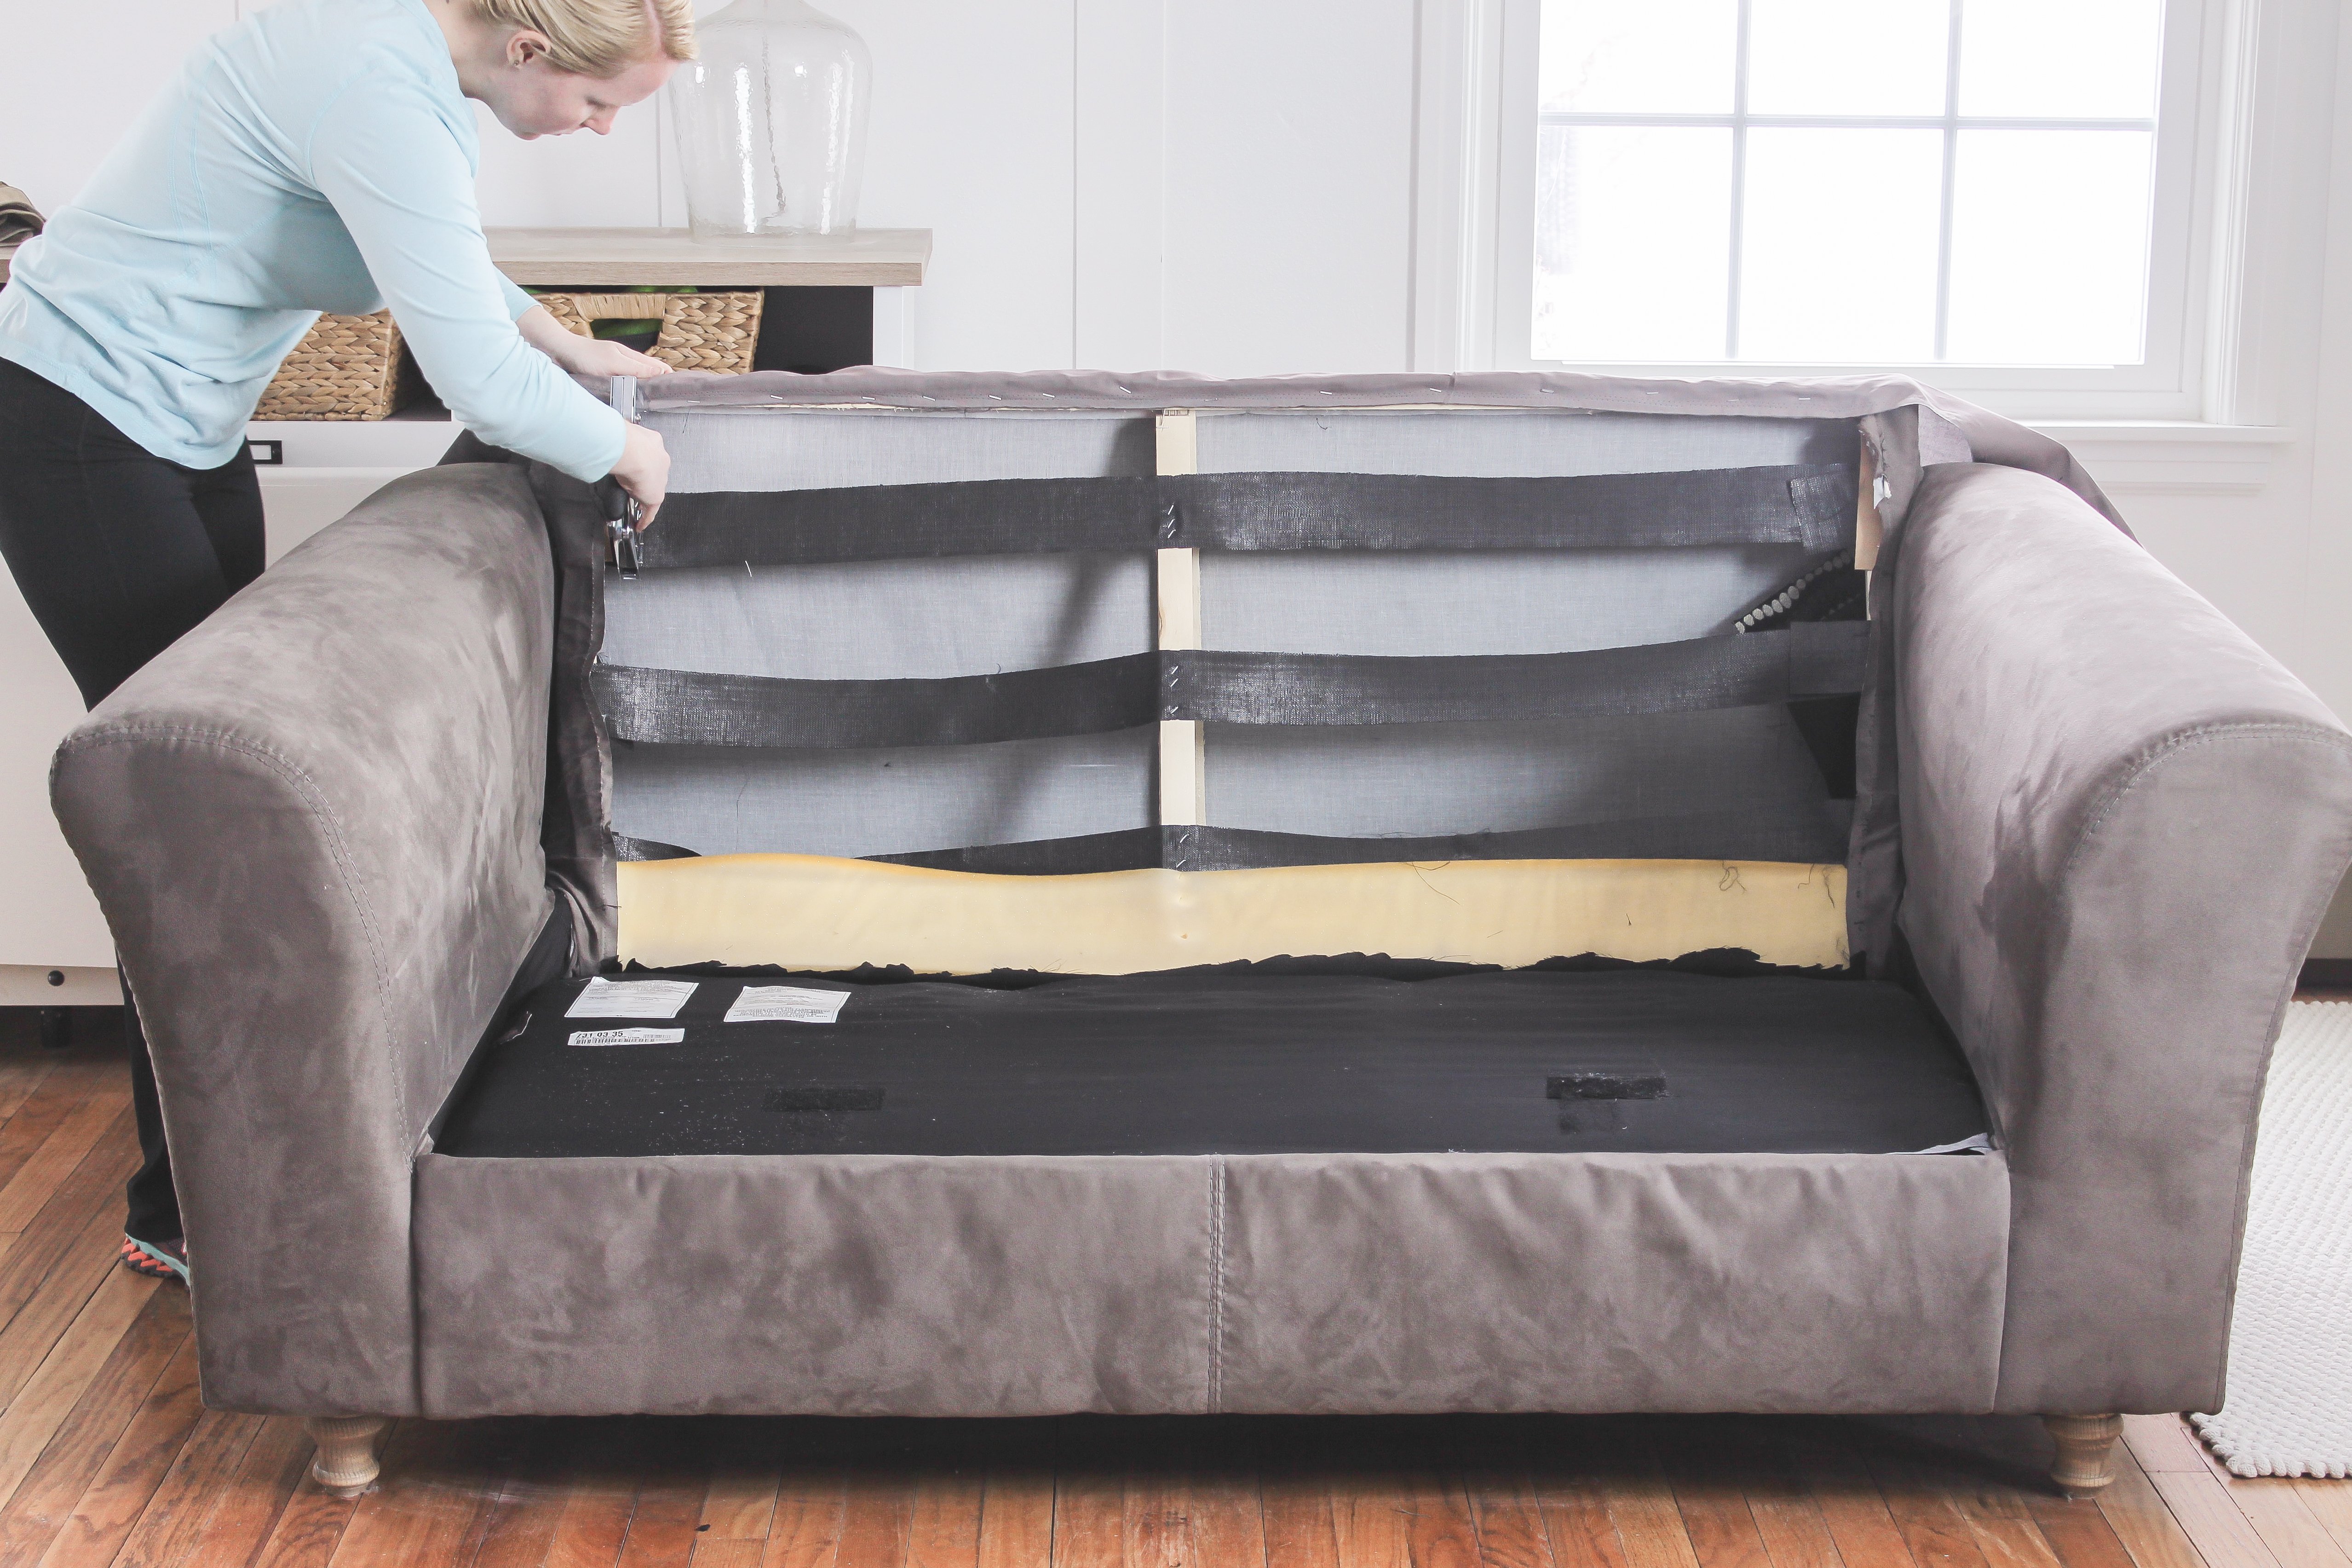 Fix A Sagging Couch Re Cushions, How To Repair Leather Couch Cushions